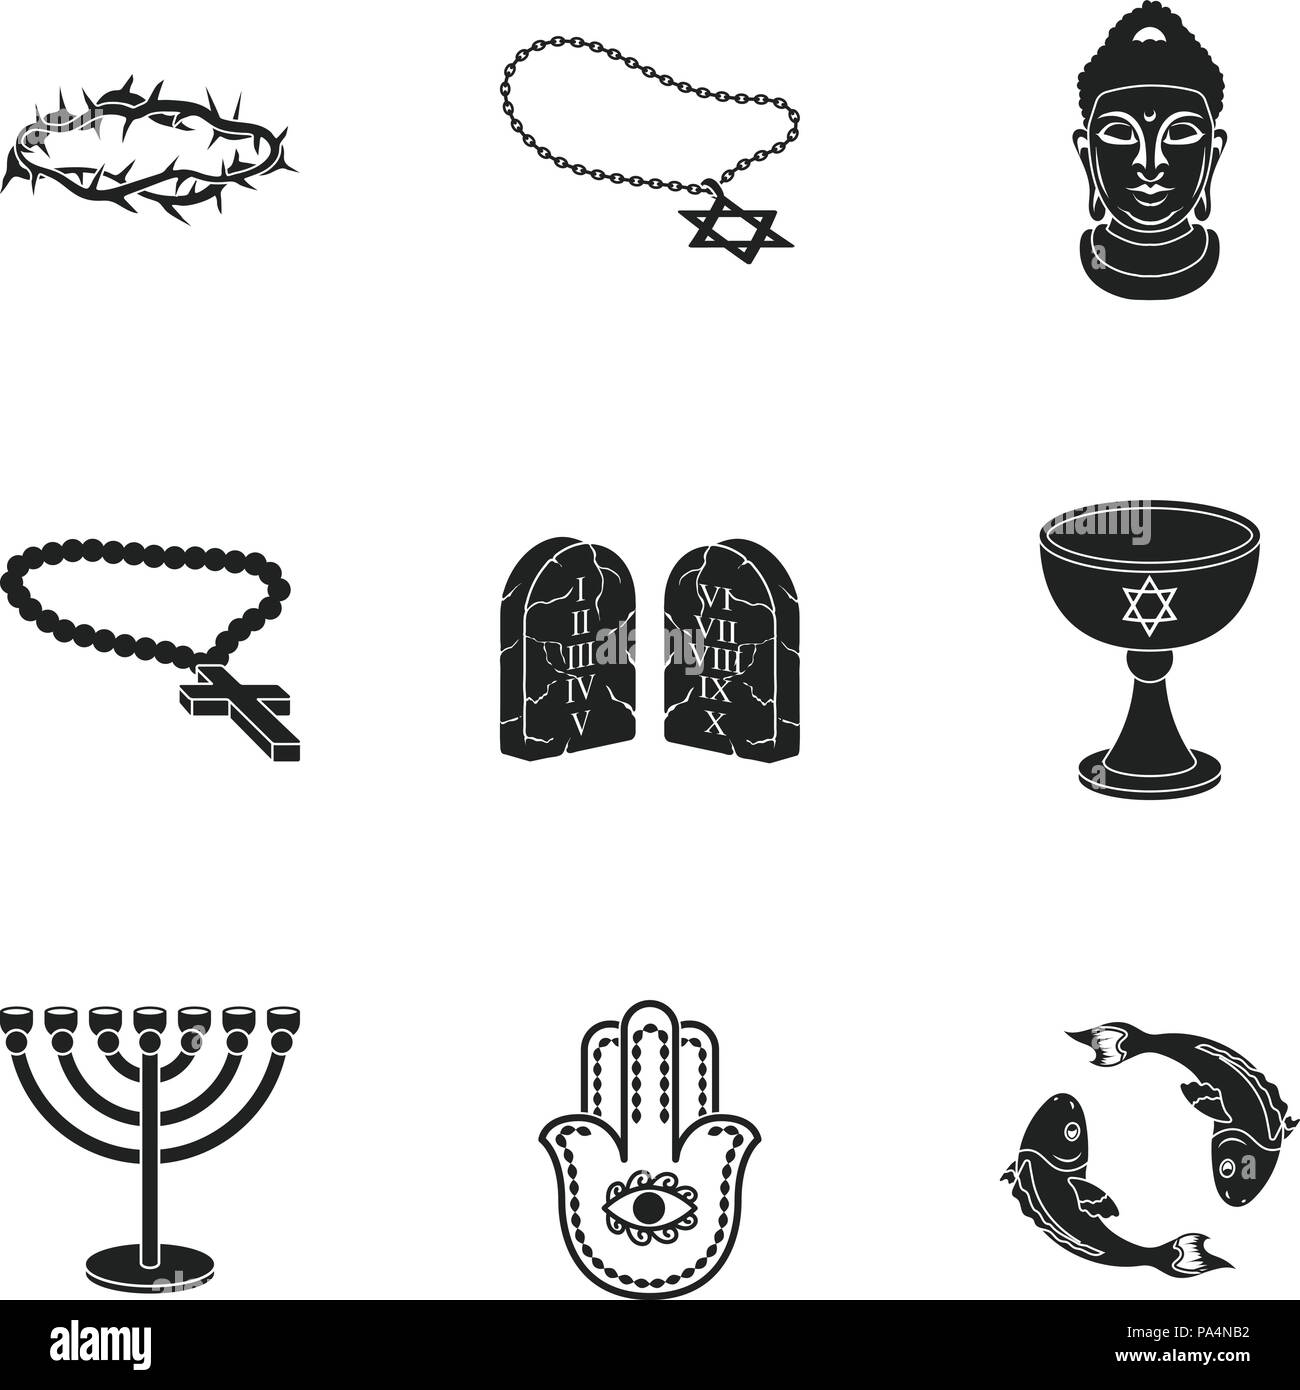 Religion Set Icons In Black Style Big Collection Of Religion Vector Symbol Stock Stock Vector